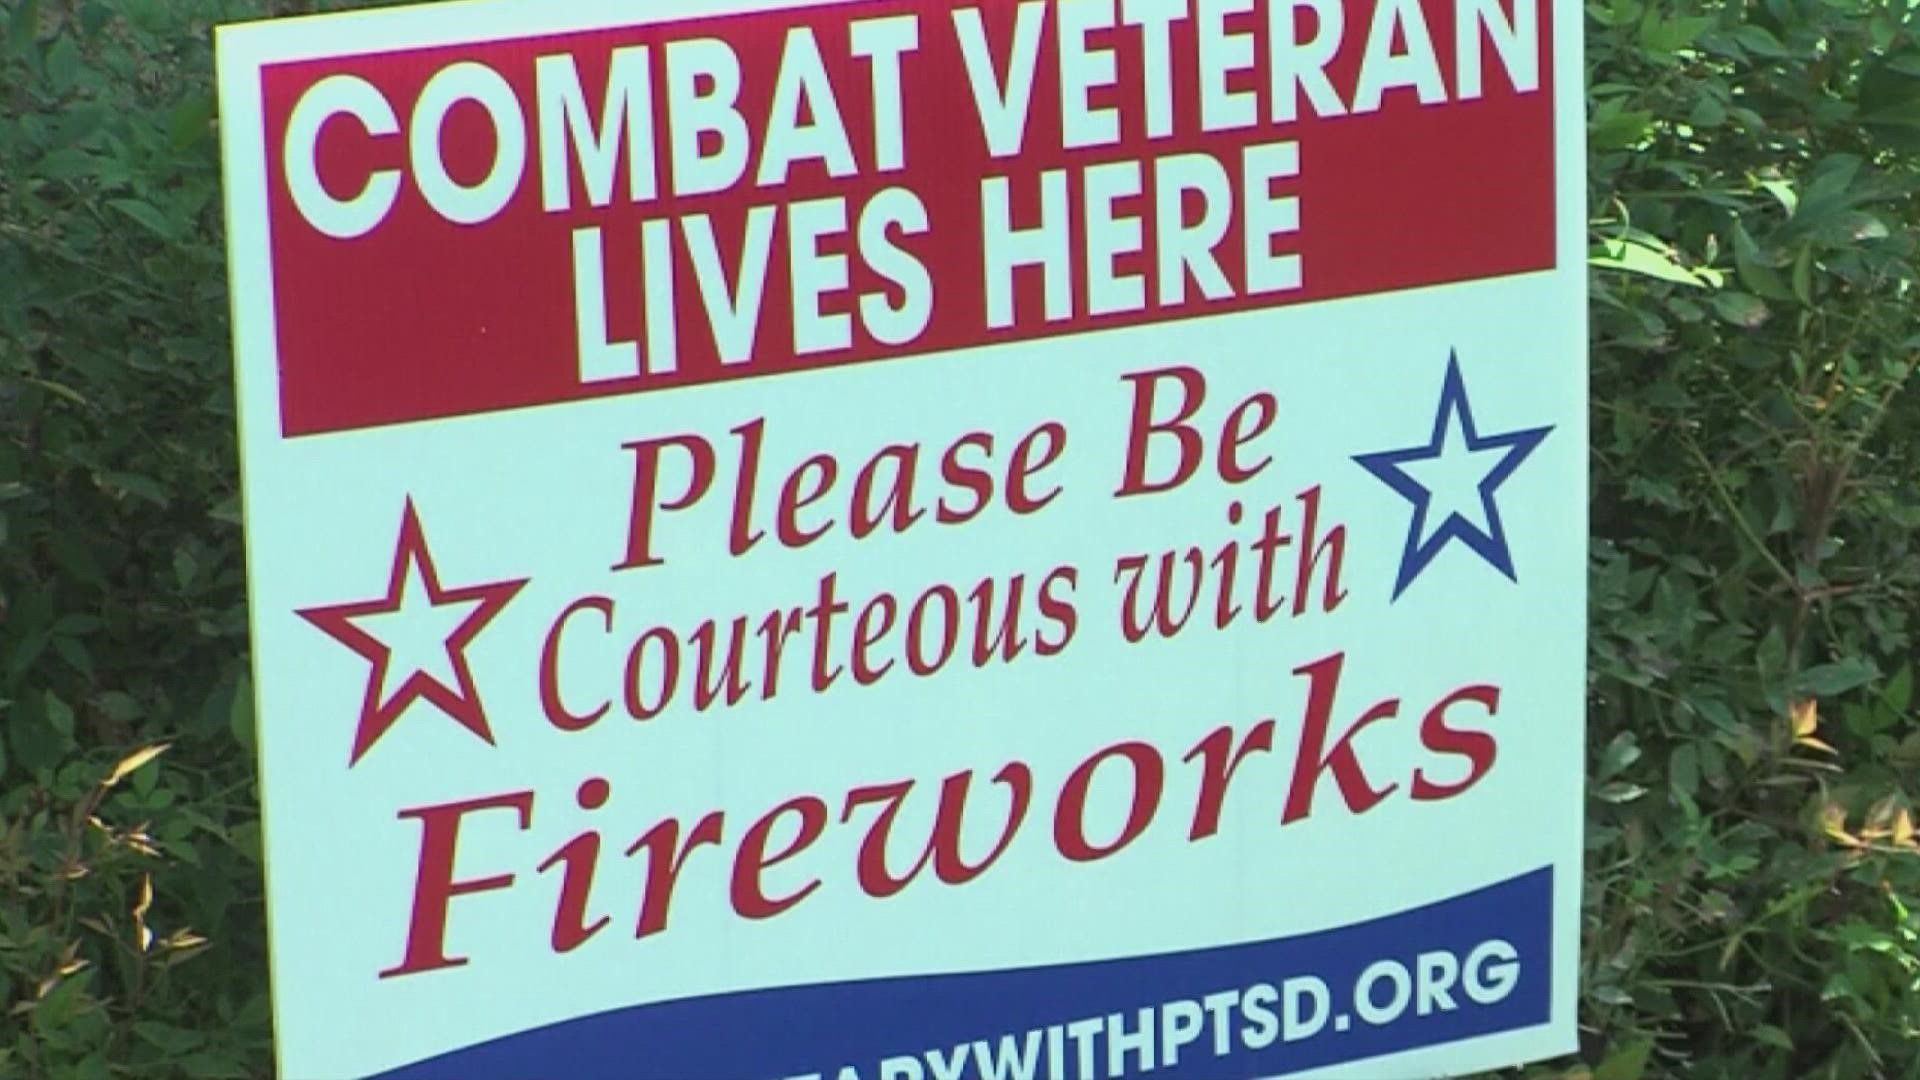 A veteran who now works in behavioral health said that fireworks could remind members of the military about artillery and gunfire, prompting emotional responses.